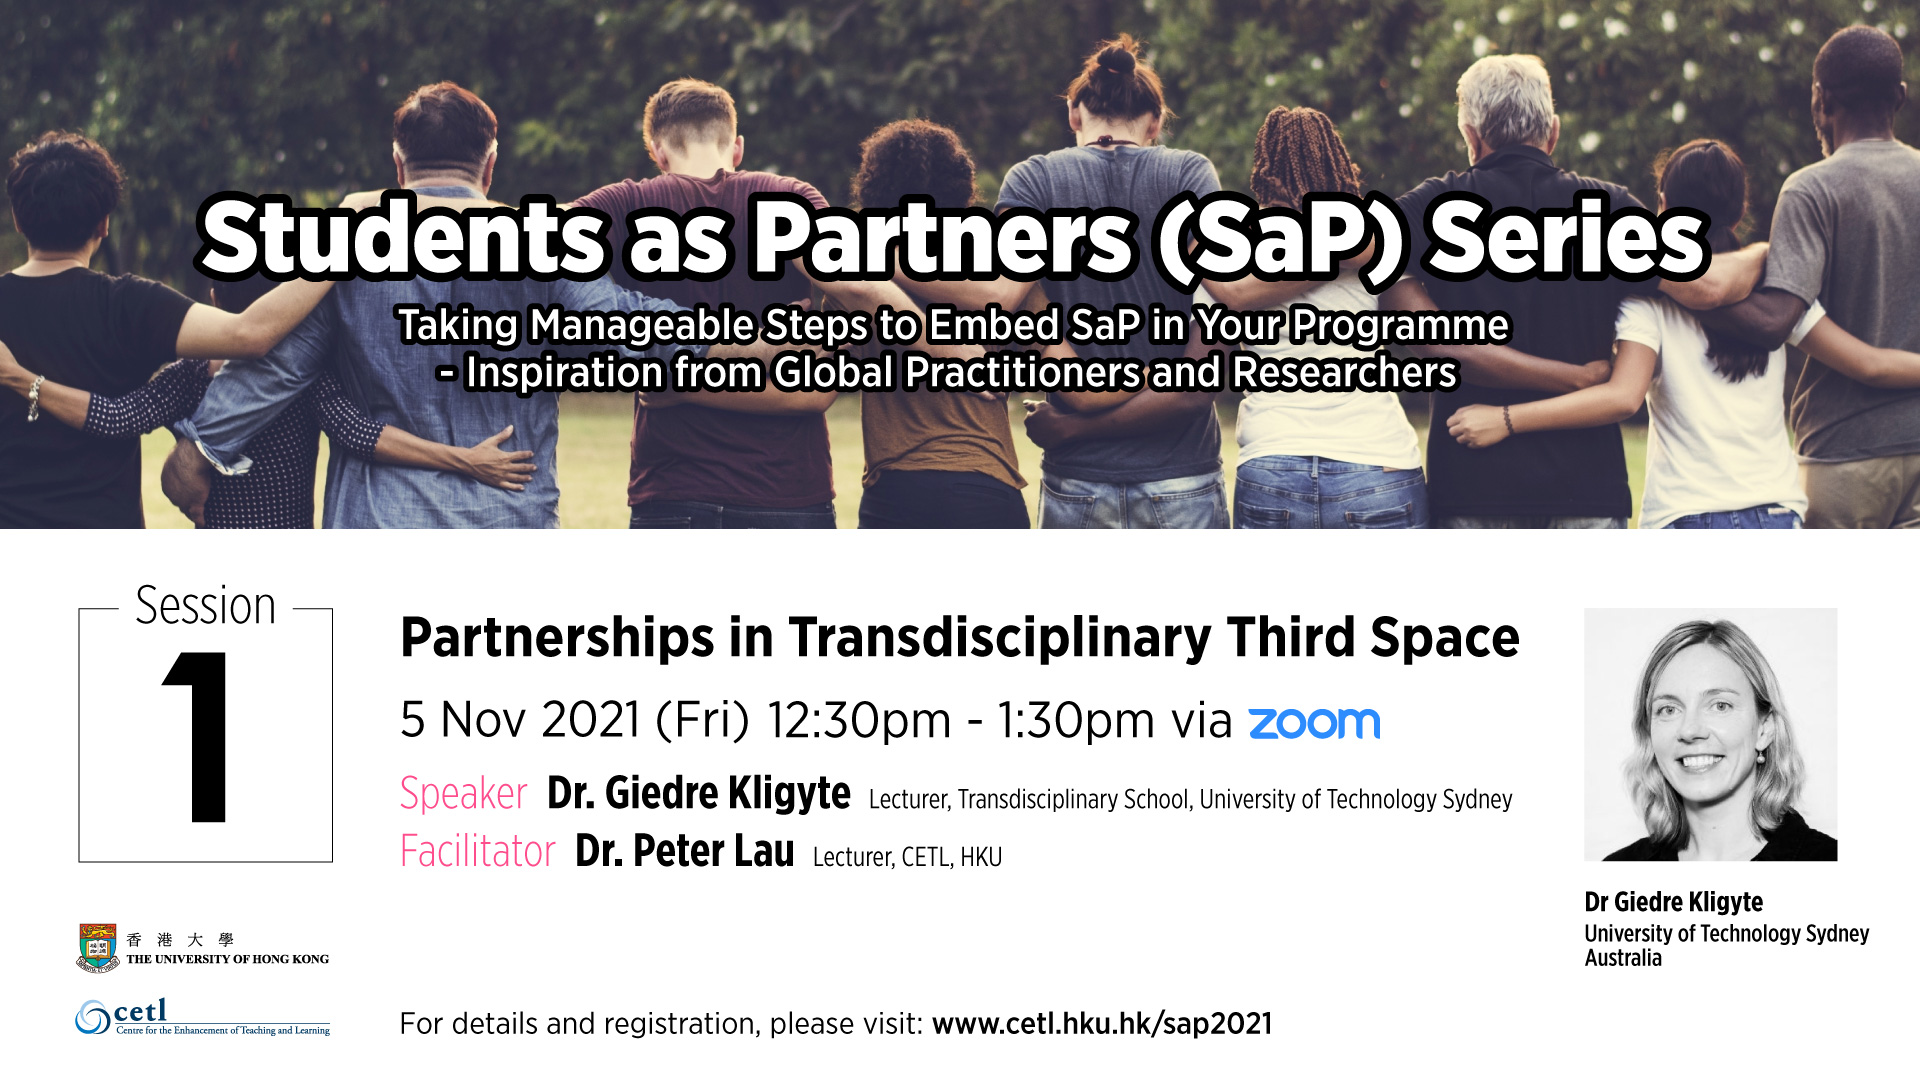 Session 1: Partnerships in Transdisciplinary Third Space